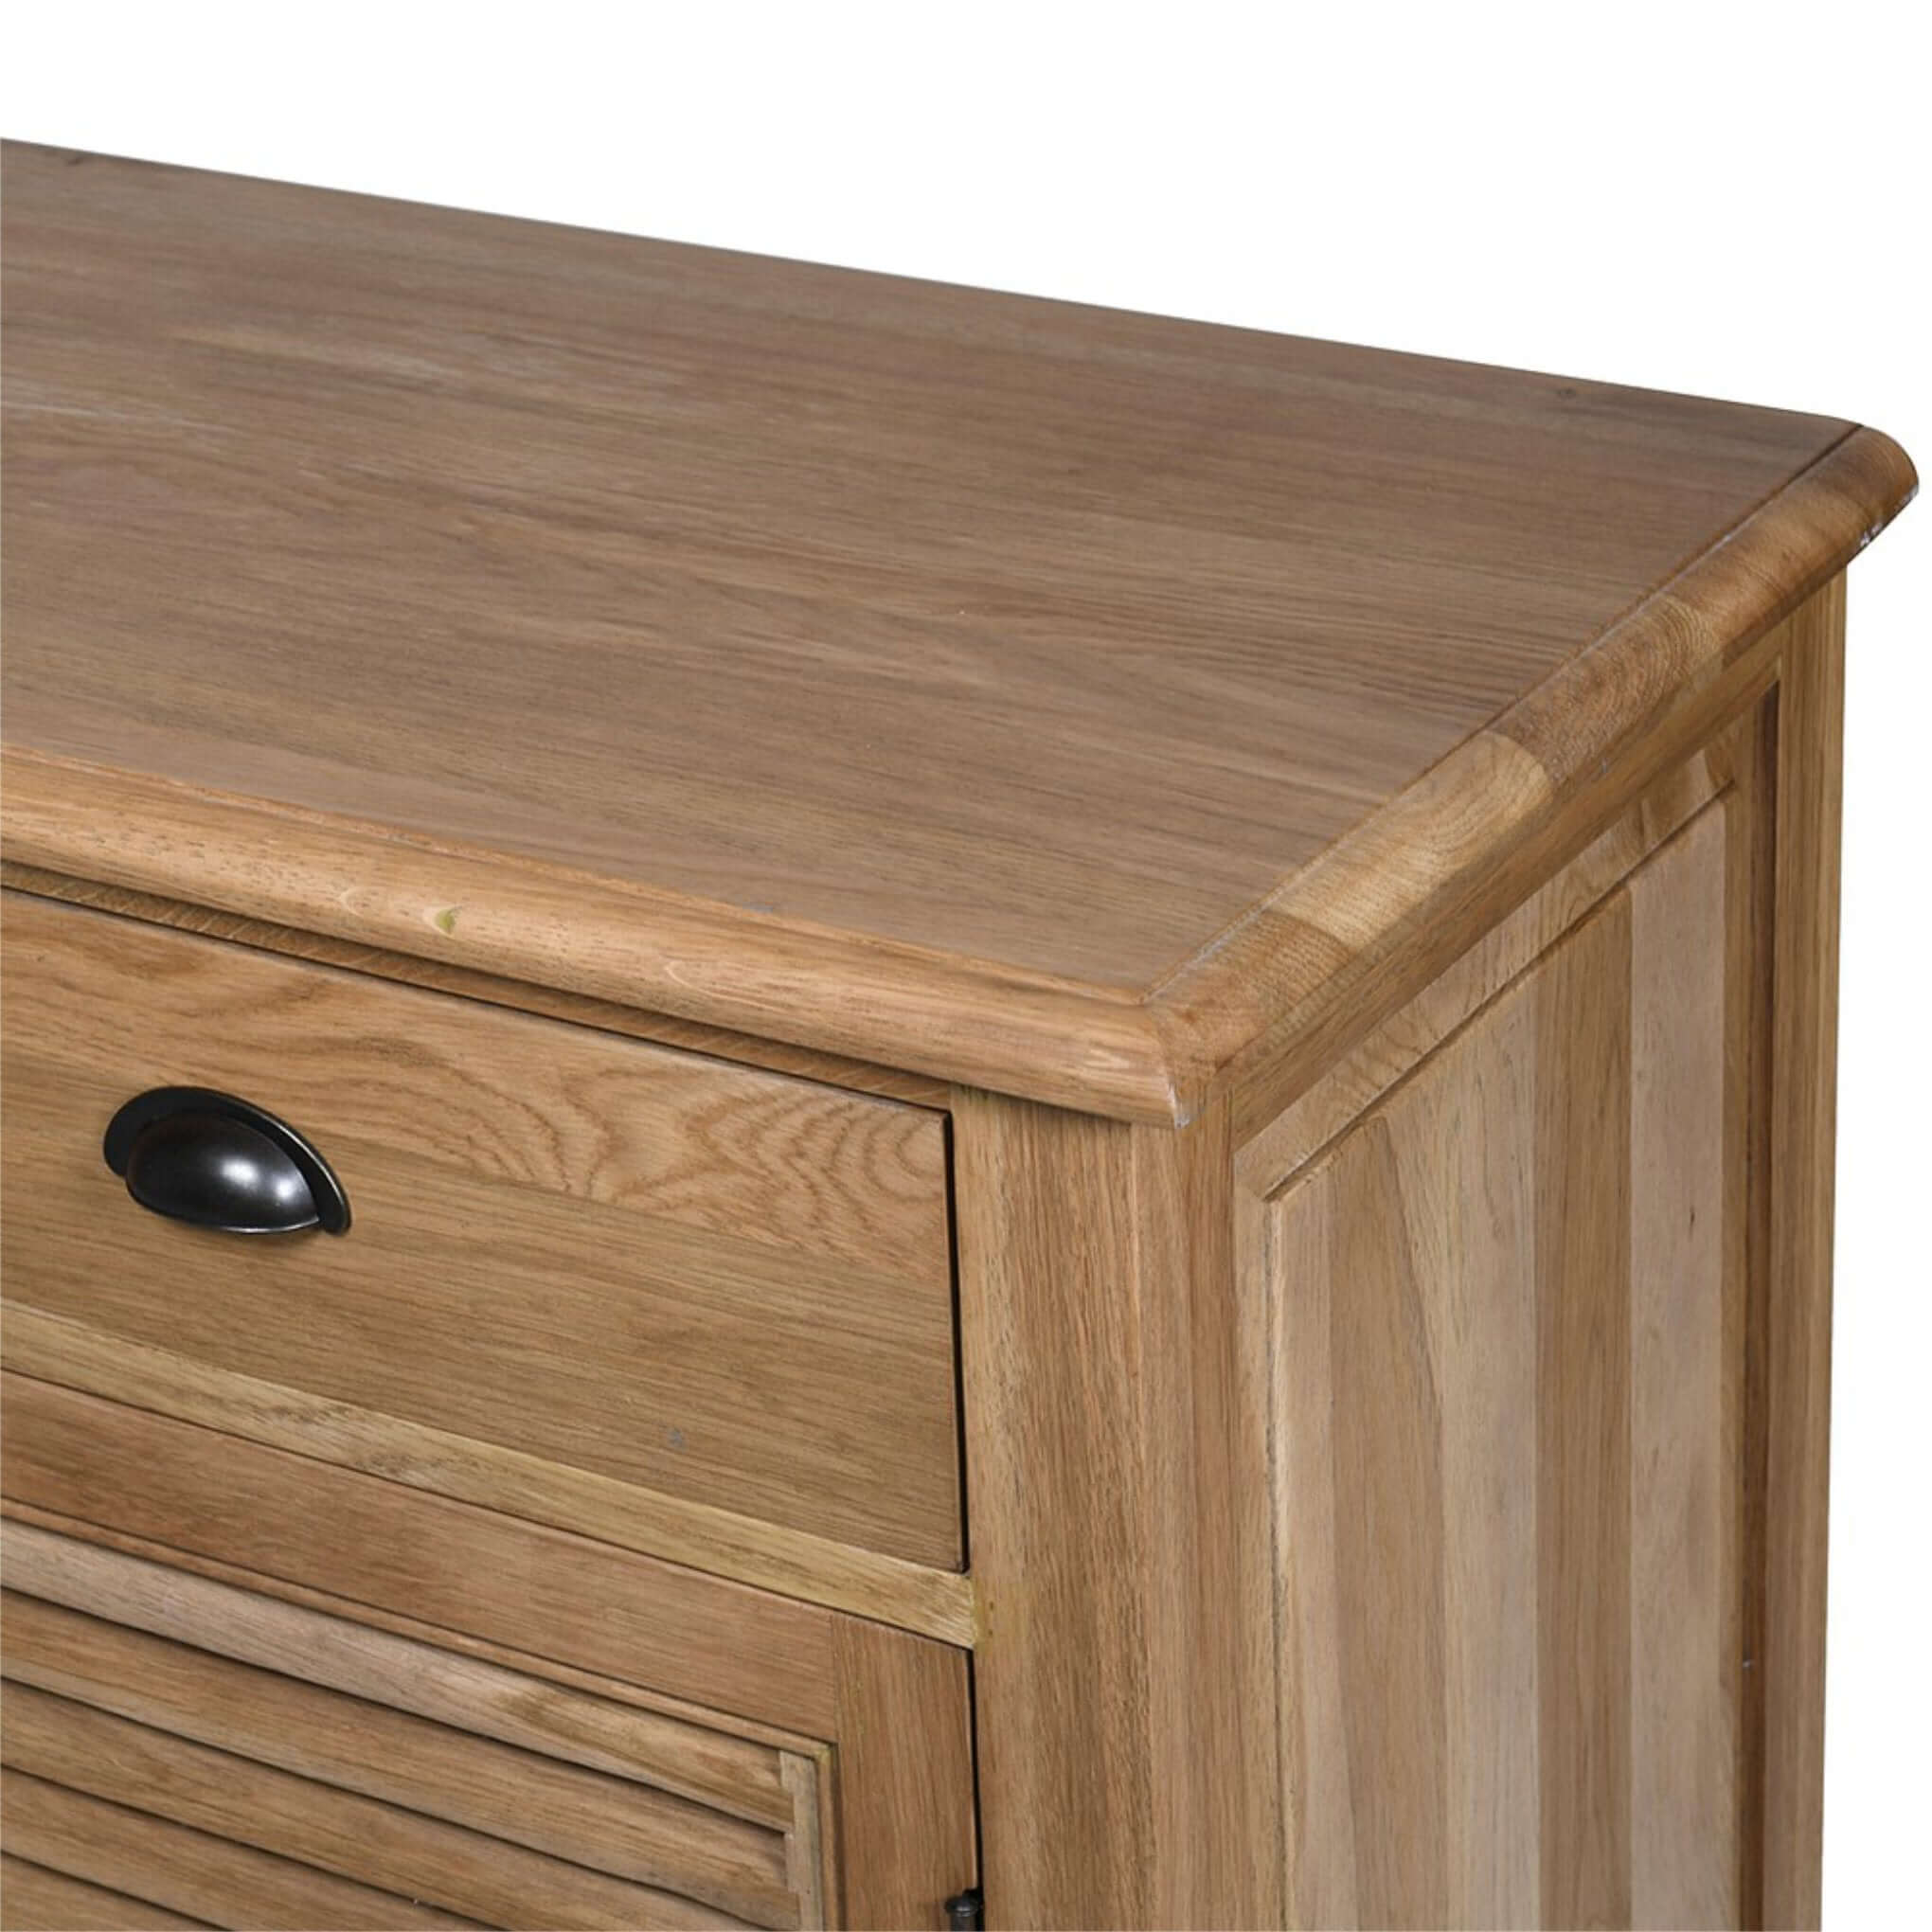 Escapology Weathered Oak 3-Door Sideboard With Drawers - escapologyhome.co.uk